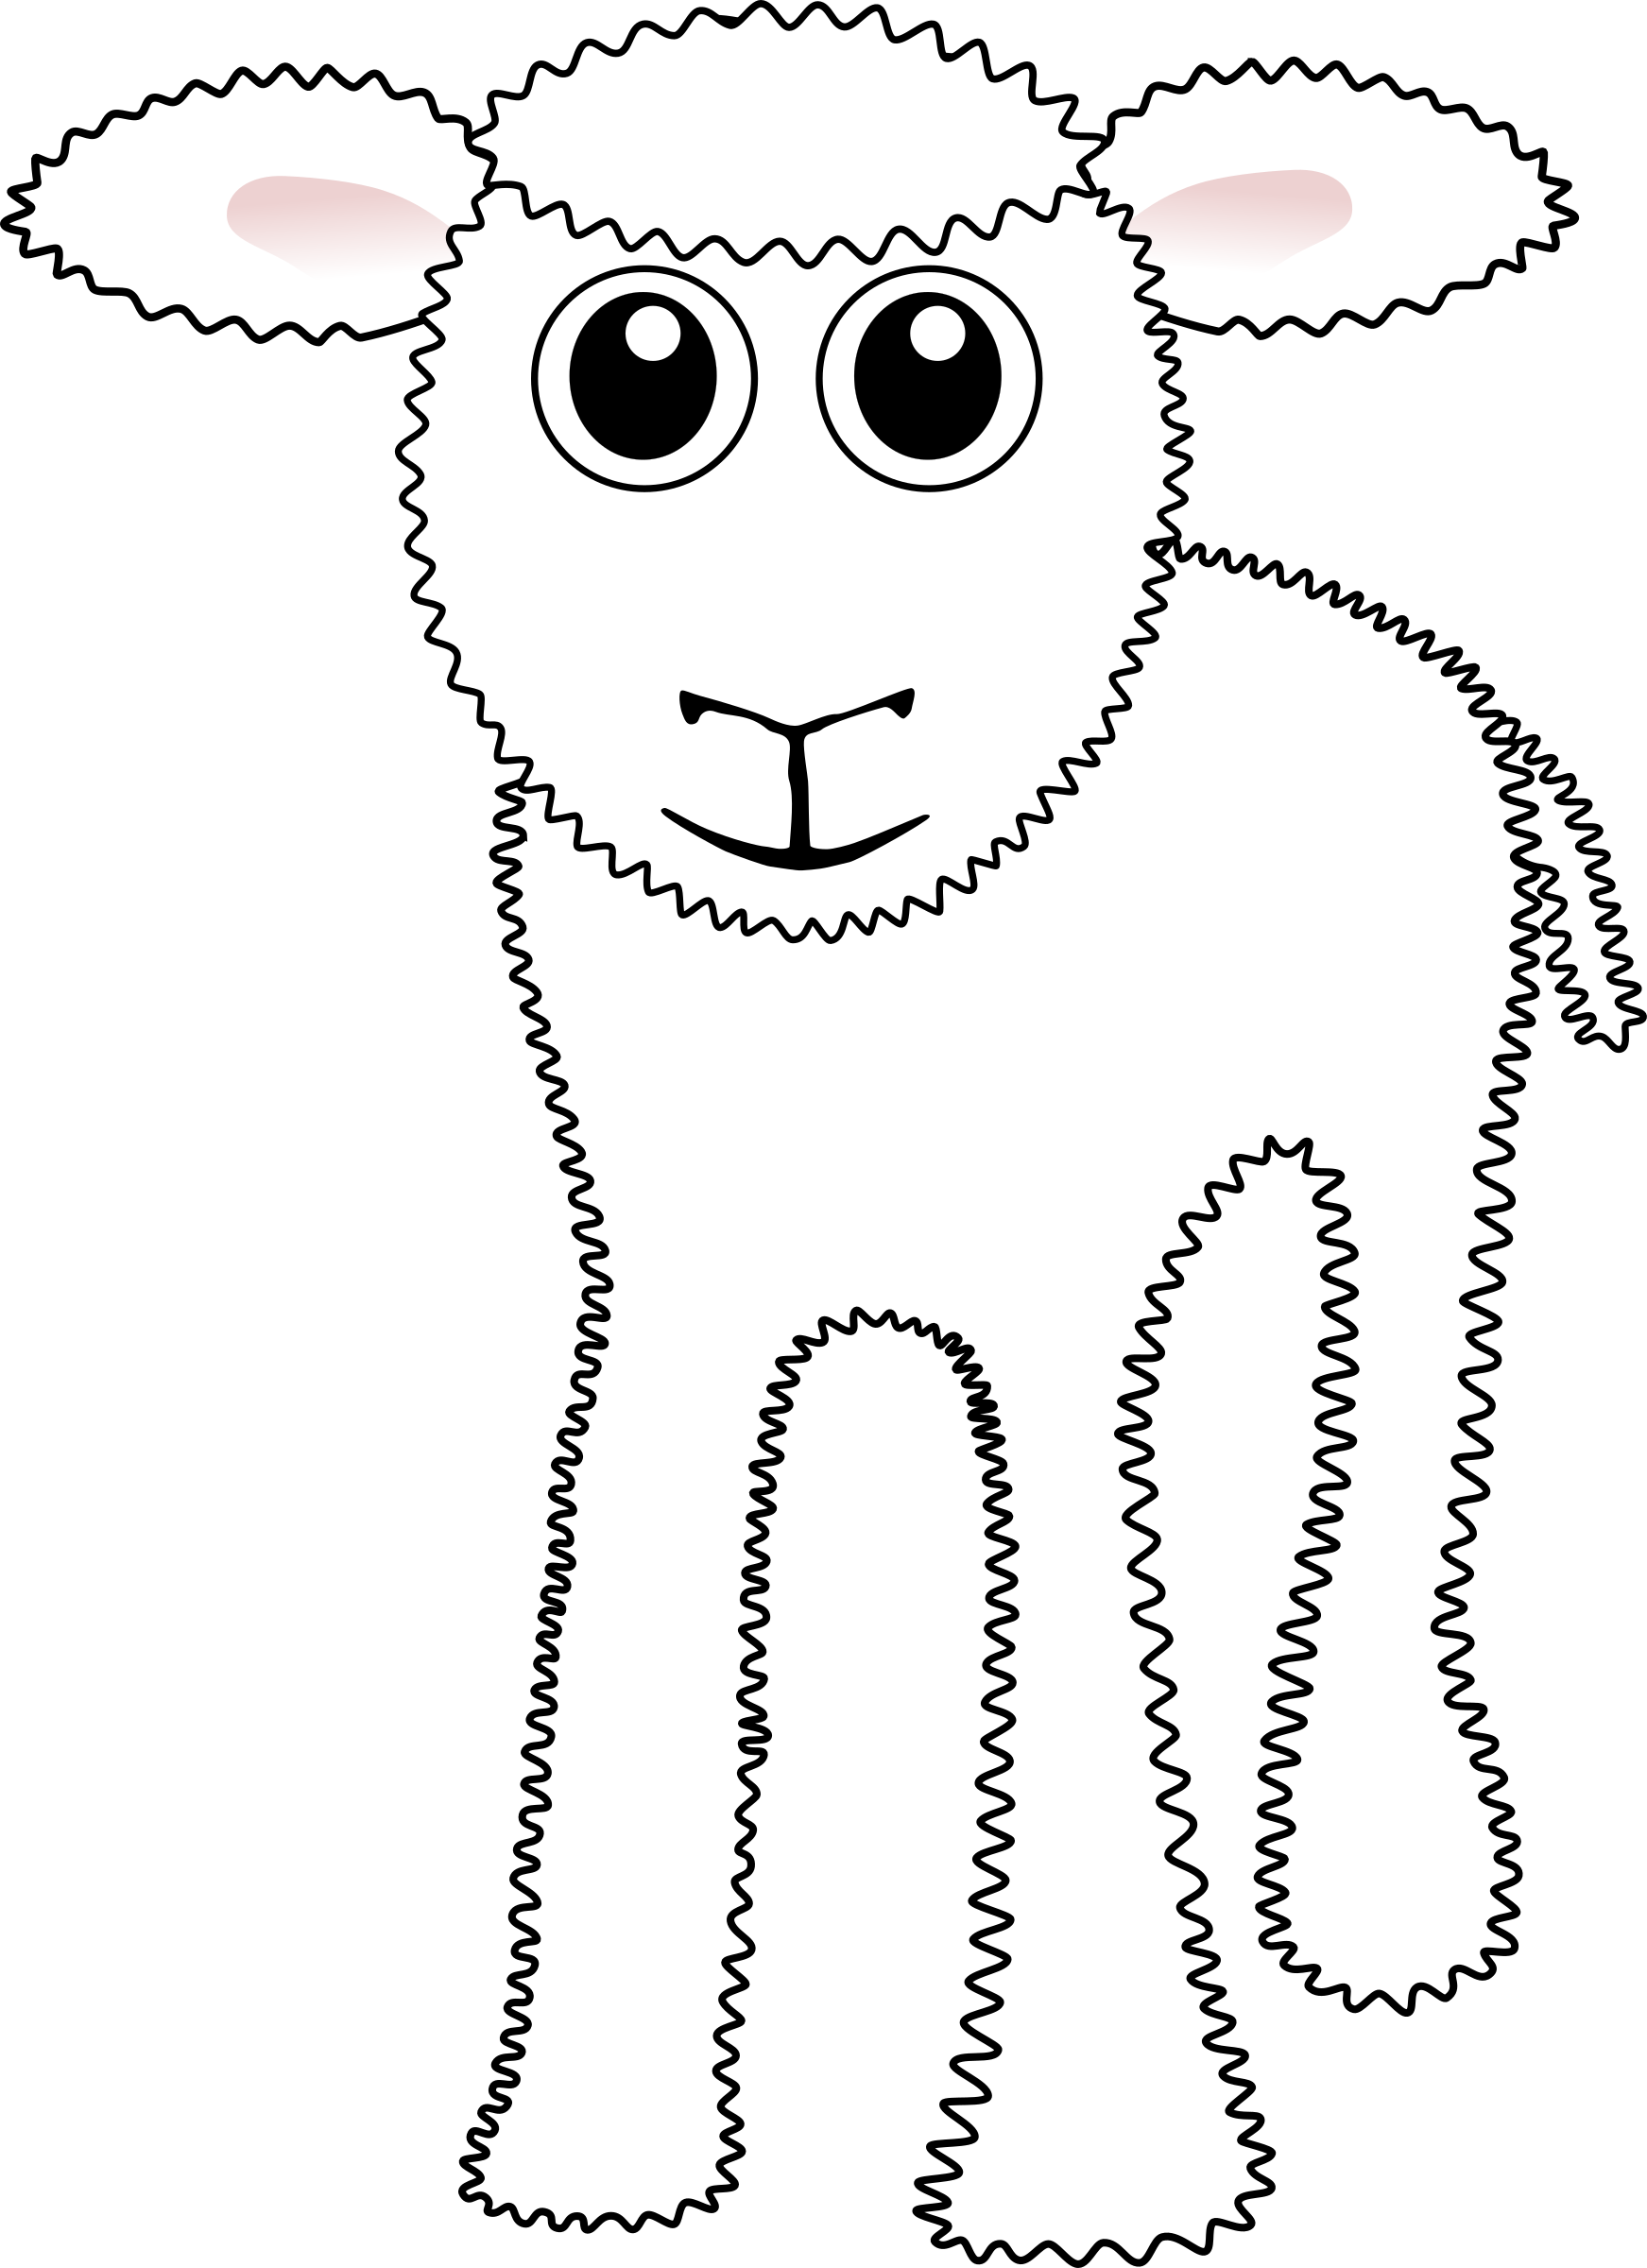 Funny White Lamb Cartoon PNG icon